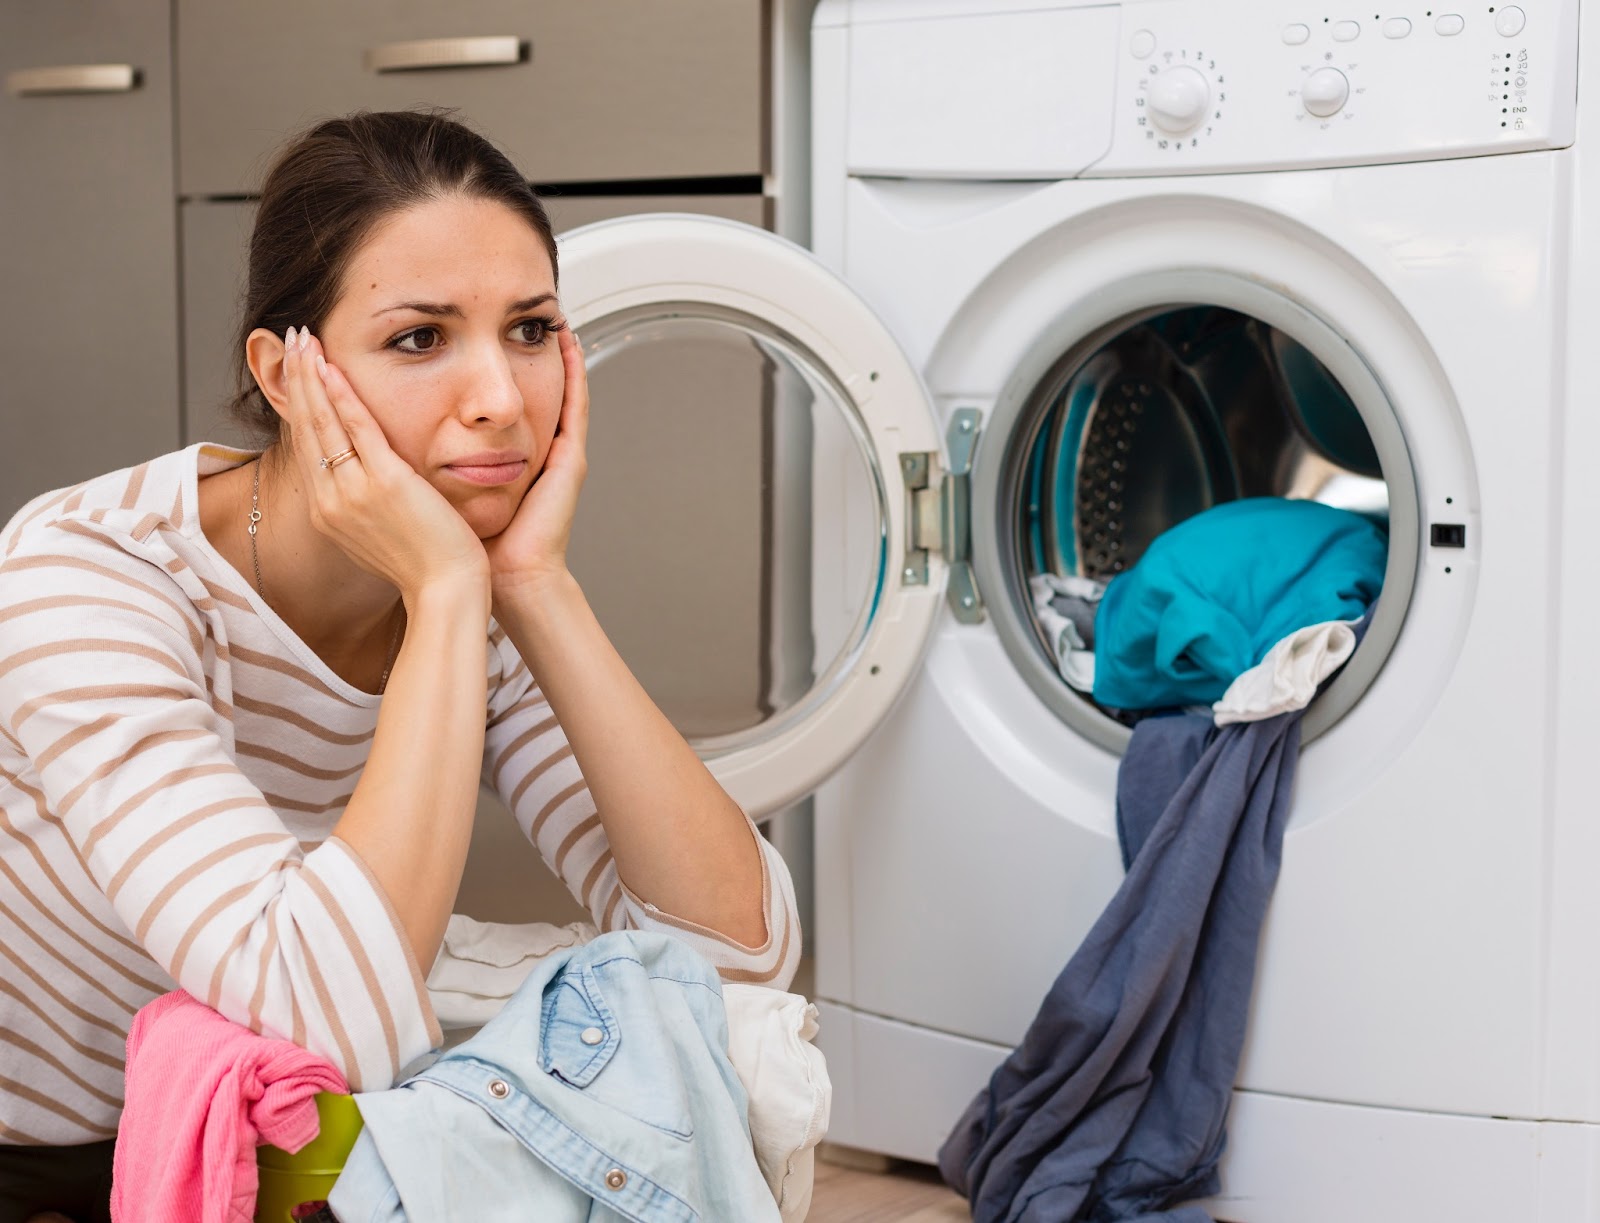 Stressed woman overloading the washer